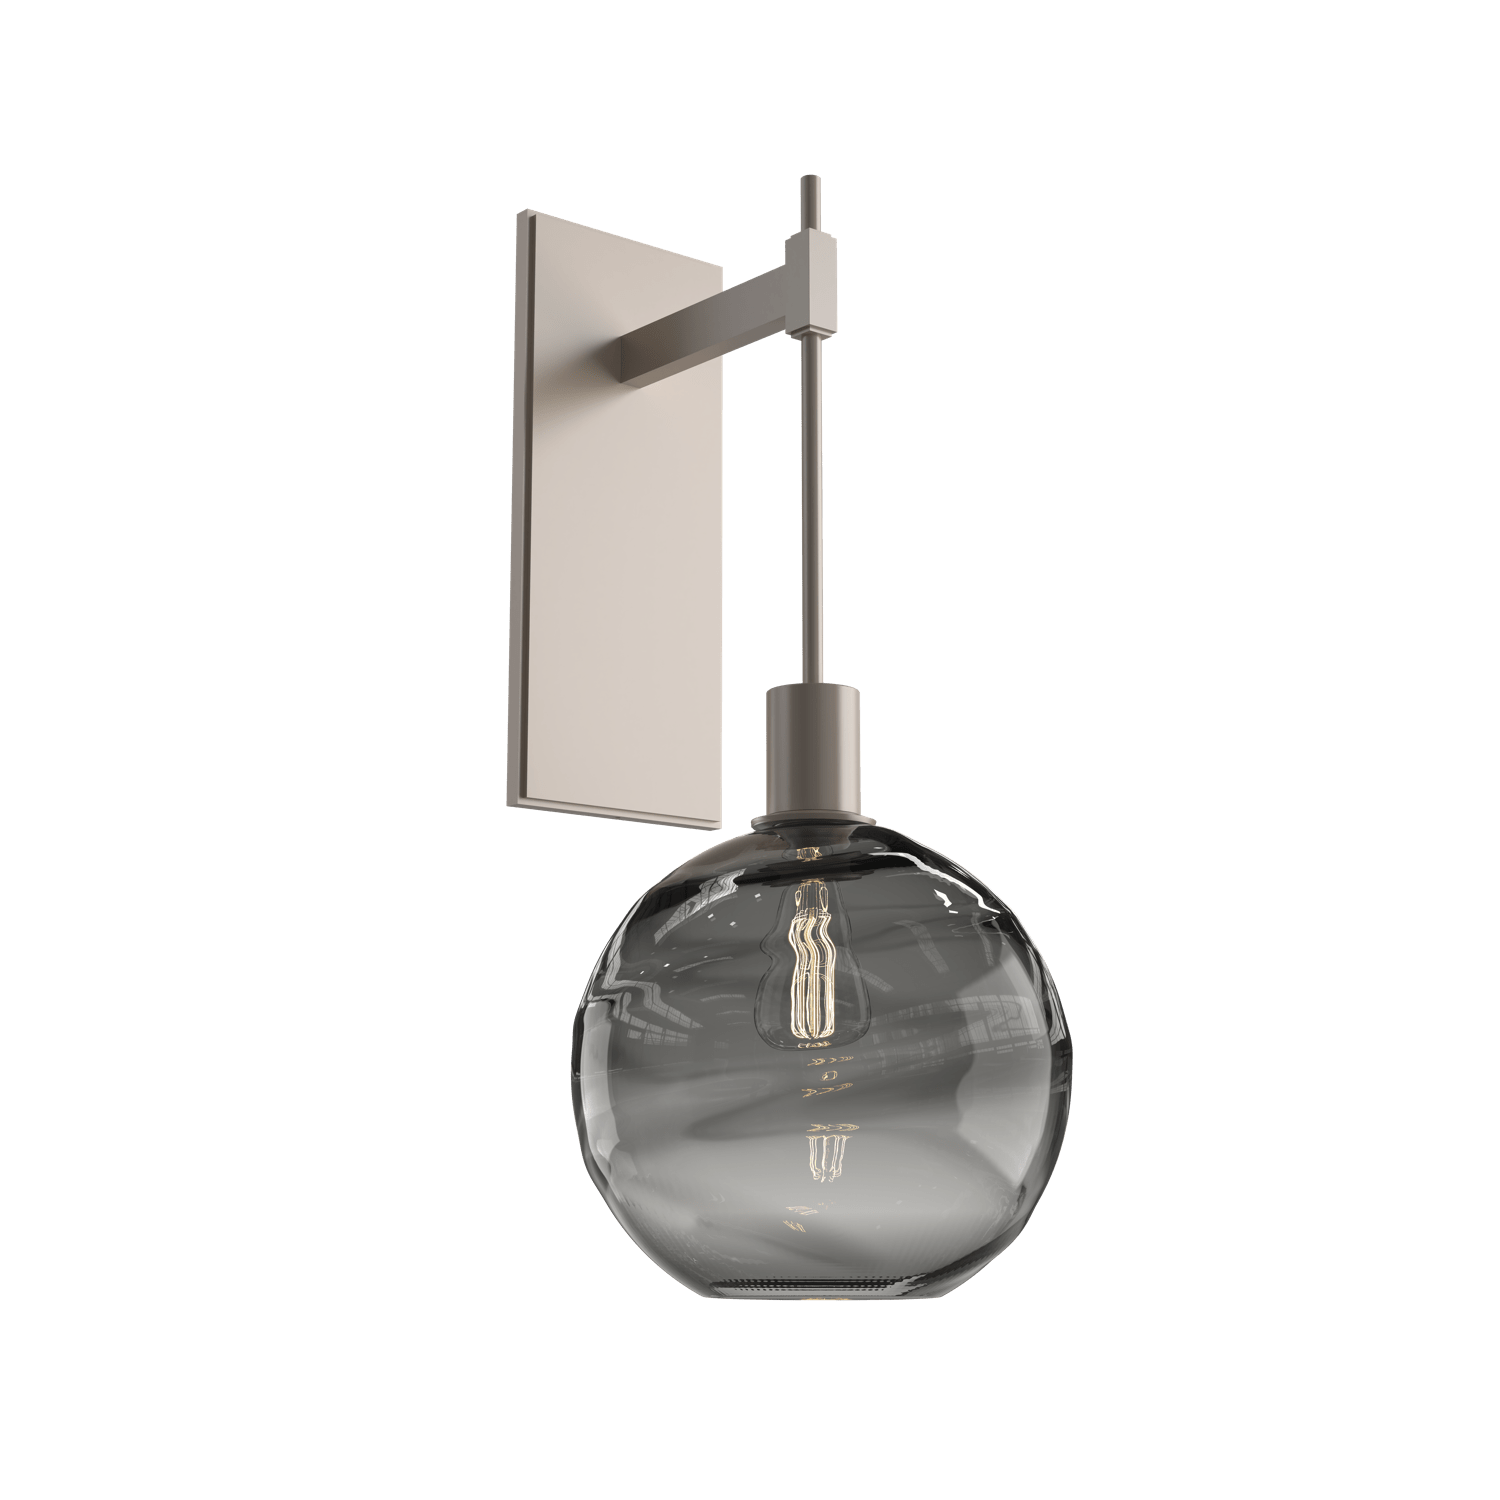 IDB0047-22-BS-OS-Hammerton-Studio-Optic-Blown-Glass-Terra-tempo-wall-sconce-with-metallic-beige-silver-finish-and-optic-smoke-blown-glass-shades-and-incandescent-lamping